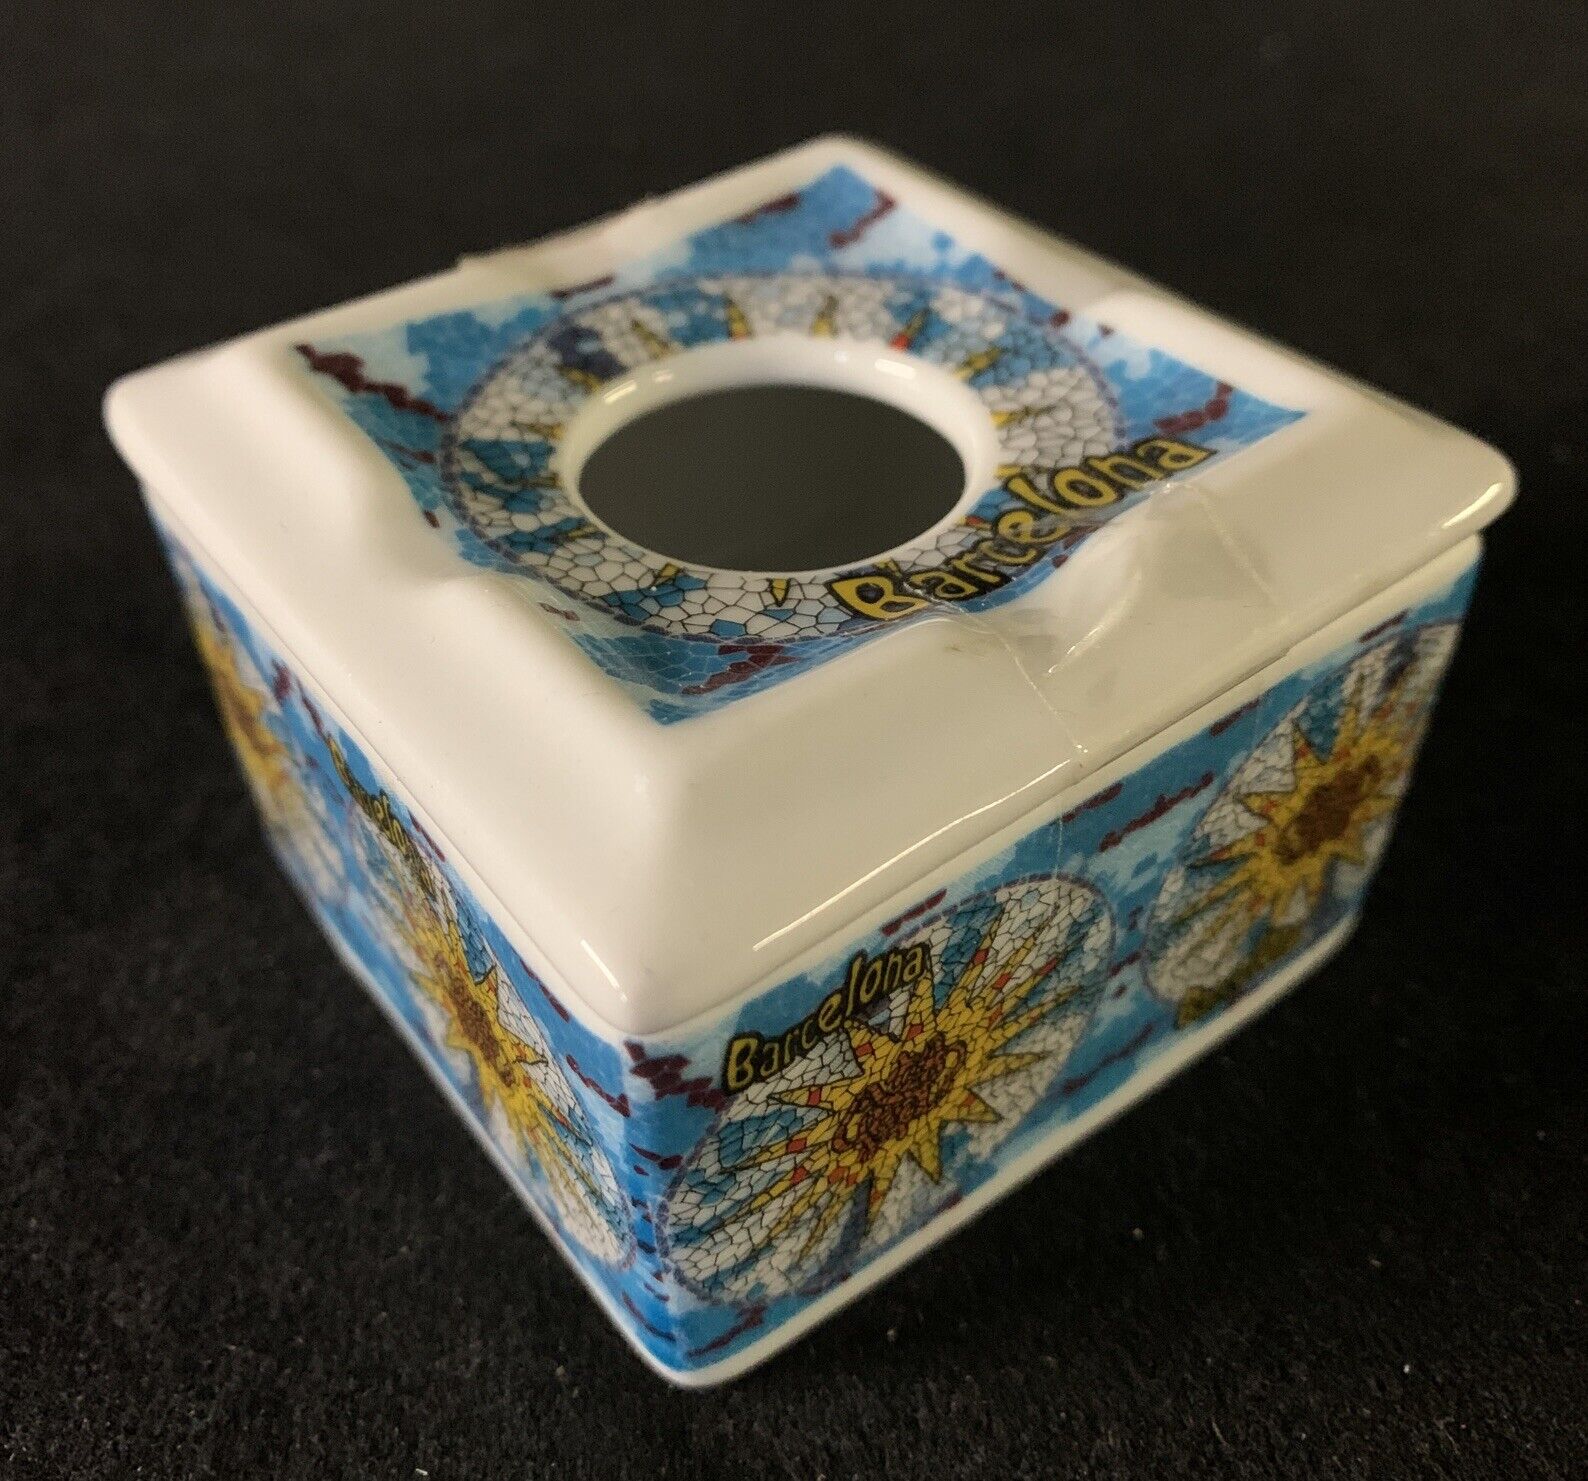 Vintage Porcelain Ashtray with Lid - Barcelona Spain With Mosaic Design.